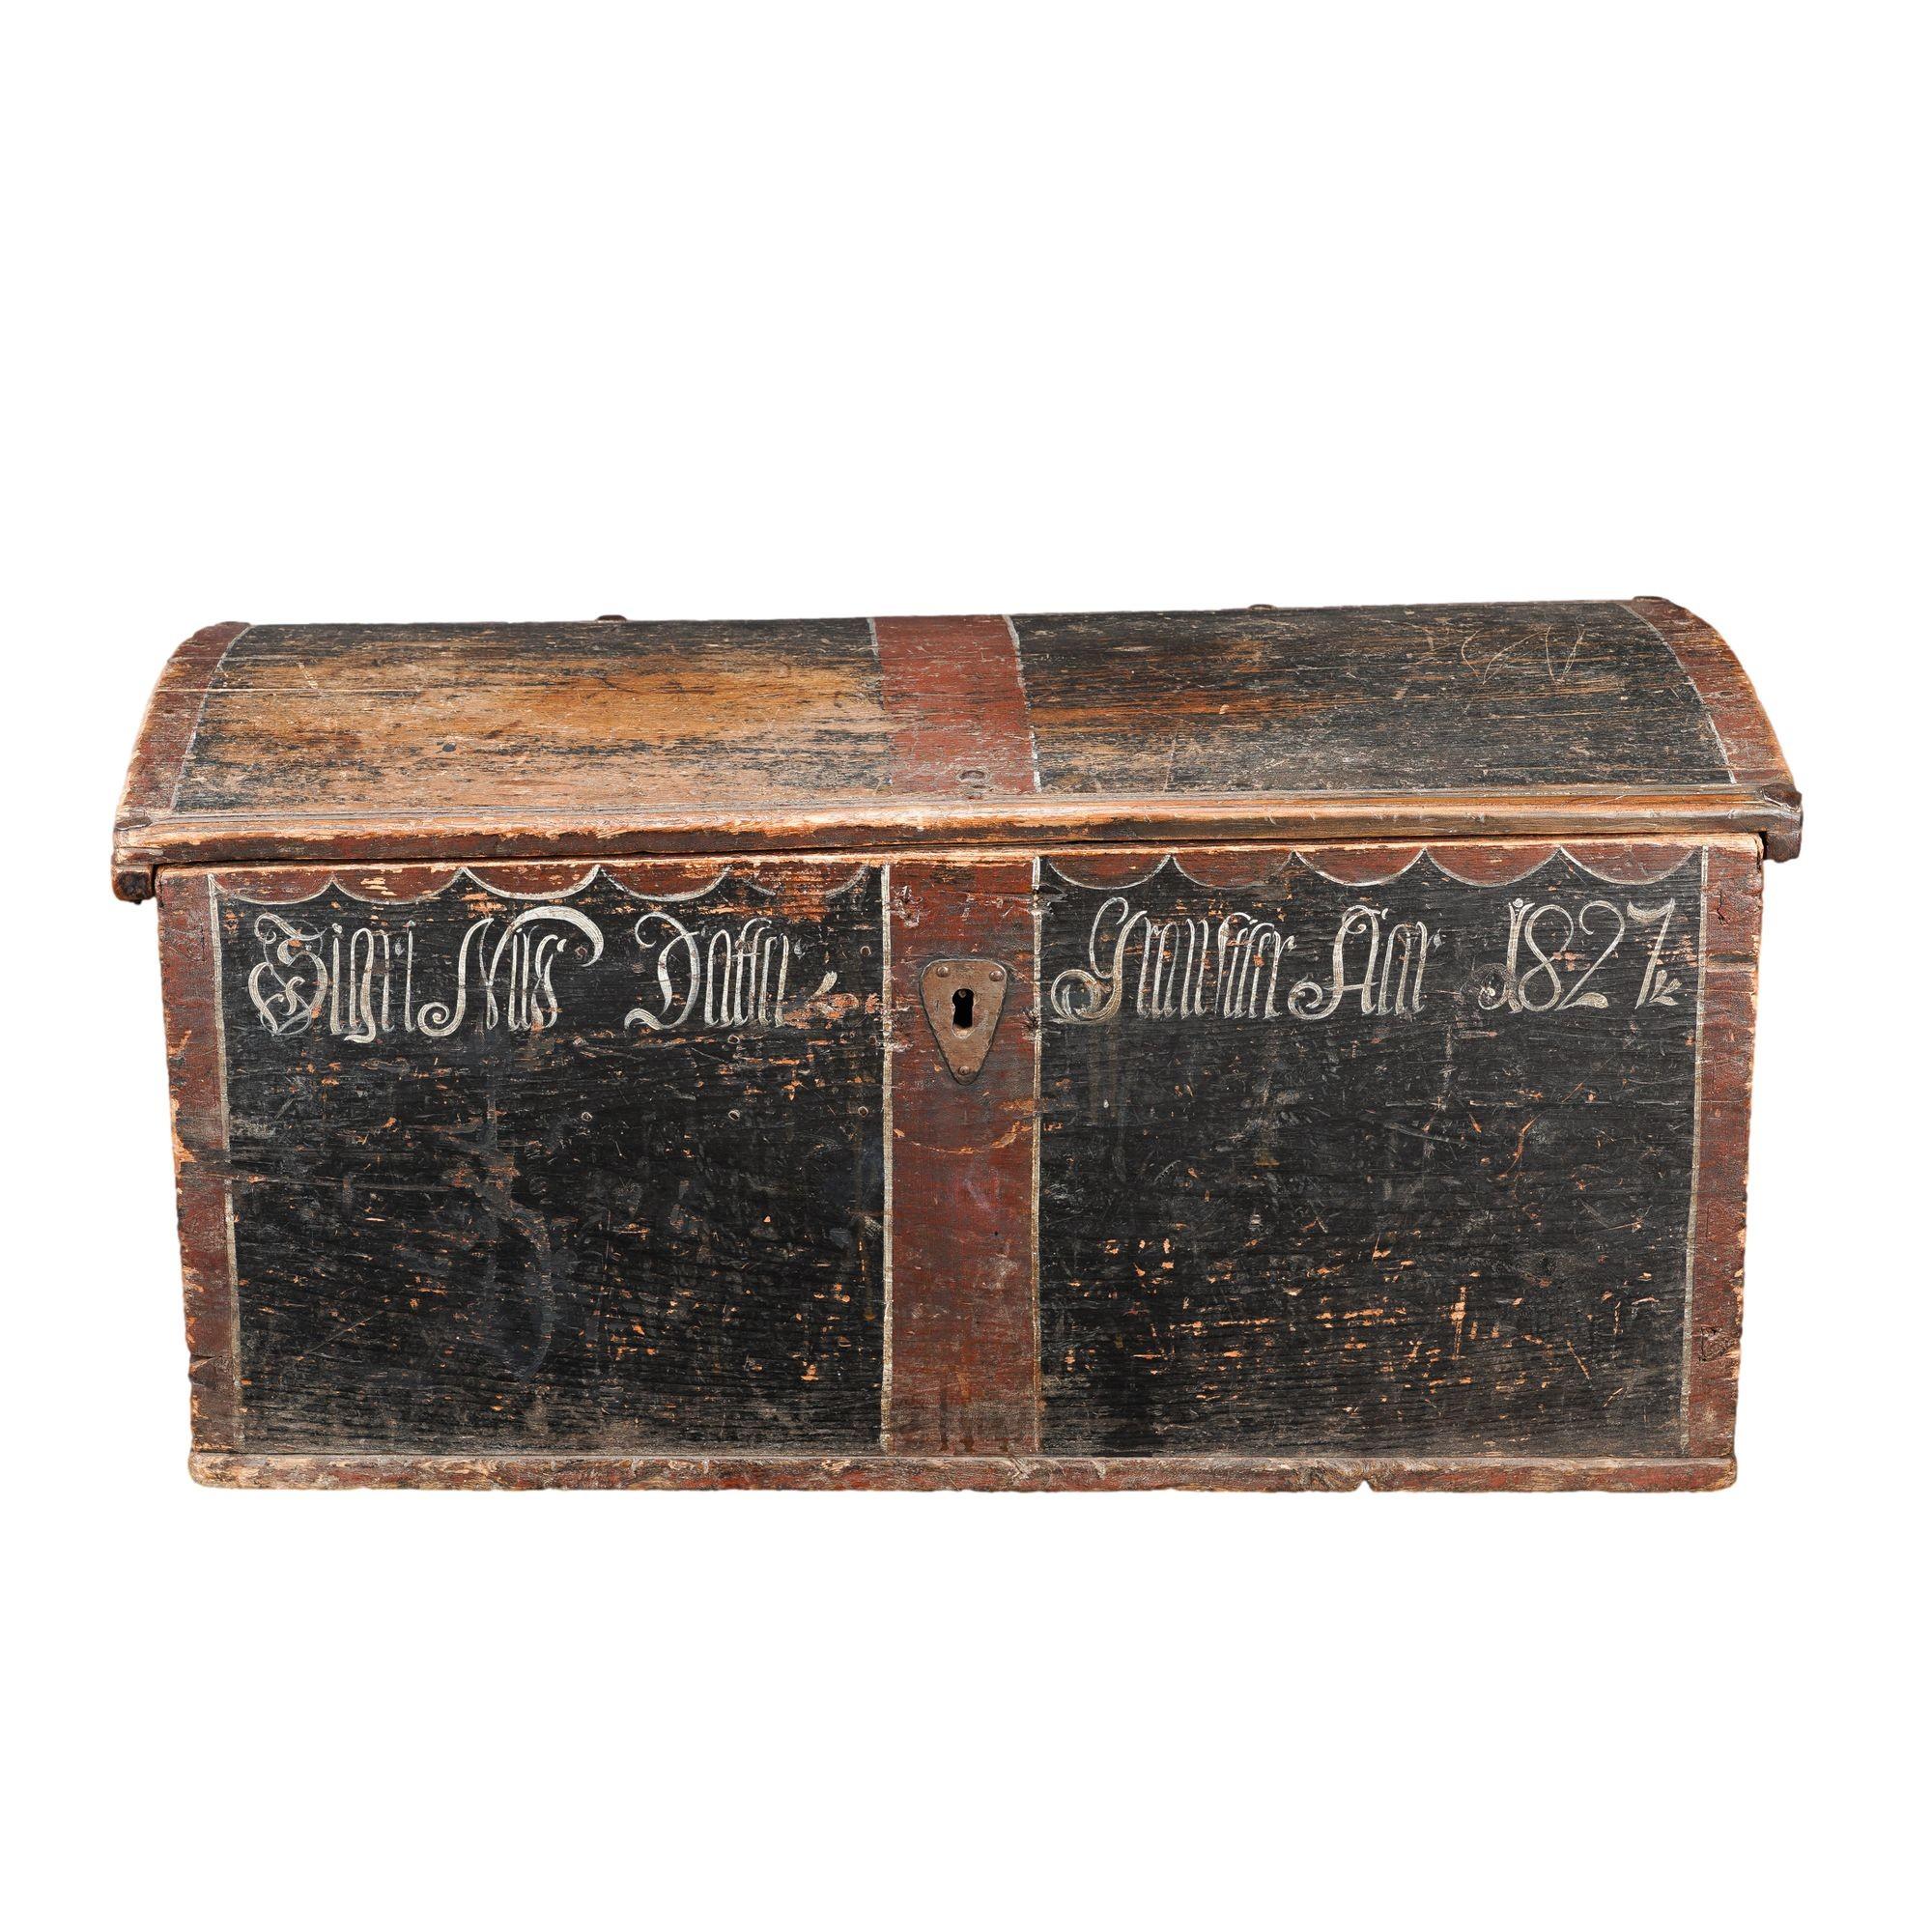 Painted Norwegian pine immigrant trunk with coffer top and mounted with a pair of hand wrought iron hinges. The trunk is assembled with dove tailed construction, hand forged rose head nails, and fitted with a pair of iron bail handles. A till with